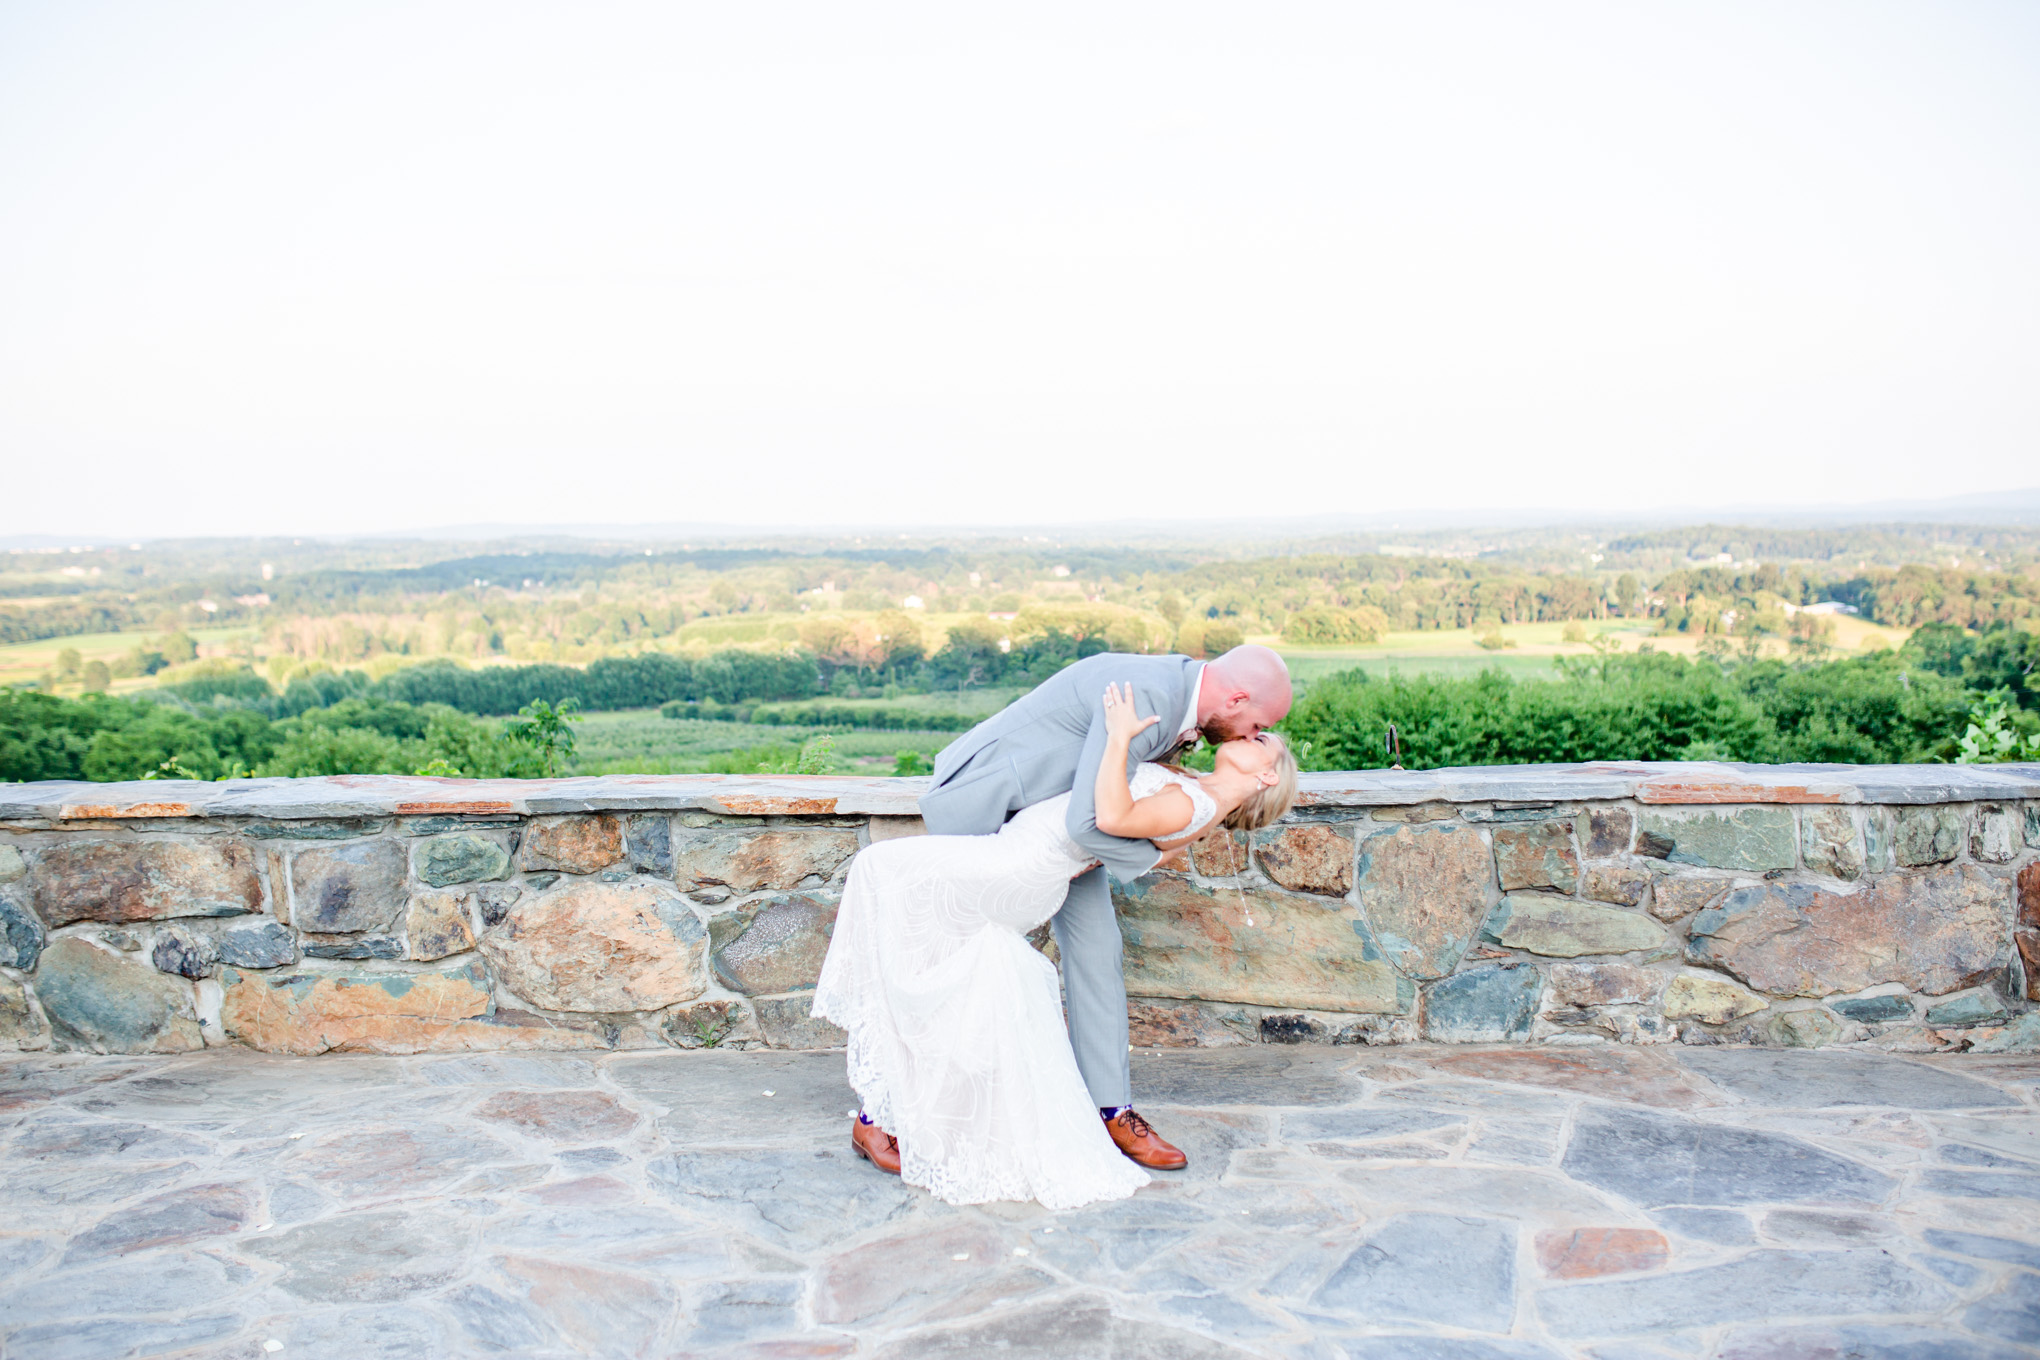 romantic Bluemont Vineyard wedding, Bluemont Vineyard, romantic wedding colors, Loudoun County wedding, Loudoun County wedding photographer, Loudoun County wedding venues, non-denominational wedding ceremony, Rachel E.H. Photography, Virginia wedding, rural wedding, rustic wedding, romantic wedding, romantic aesthetic, outdoor wedding, portraits with a view, newlywed portraits, dramatic kiss